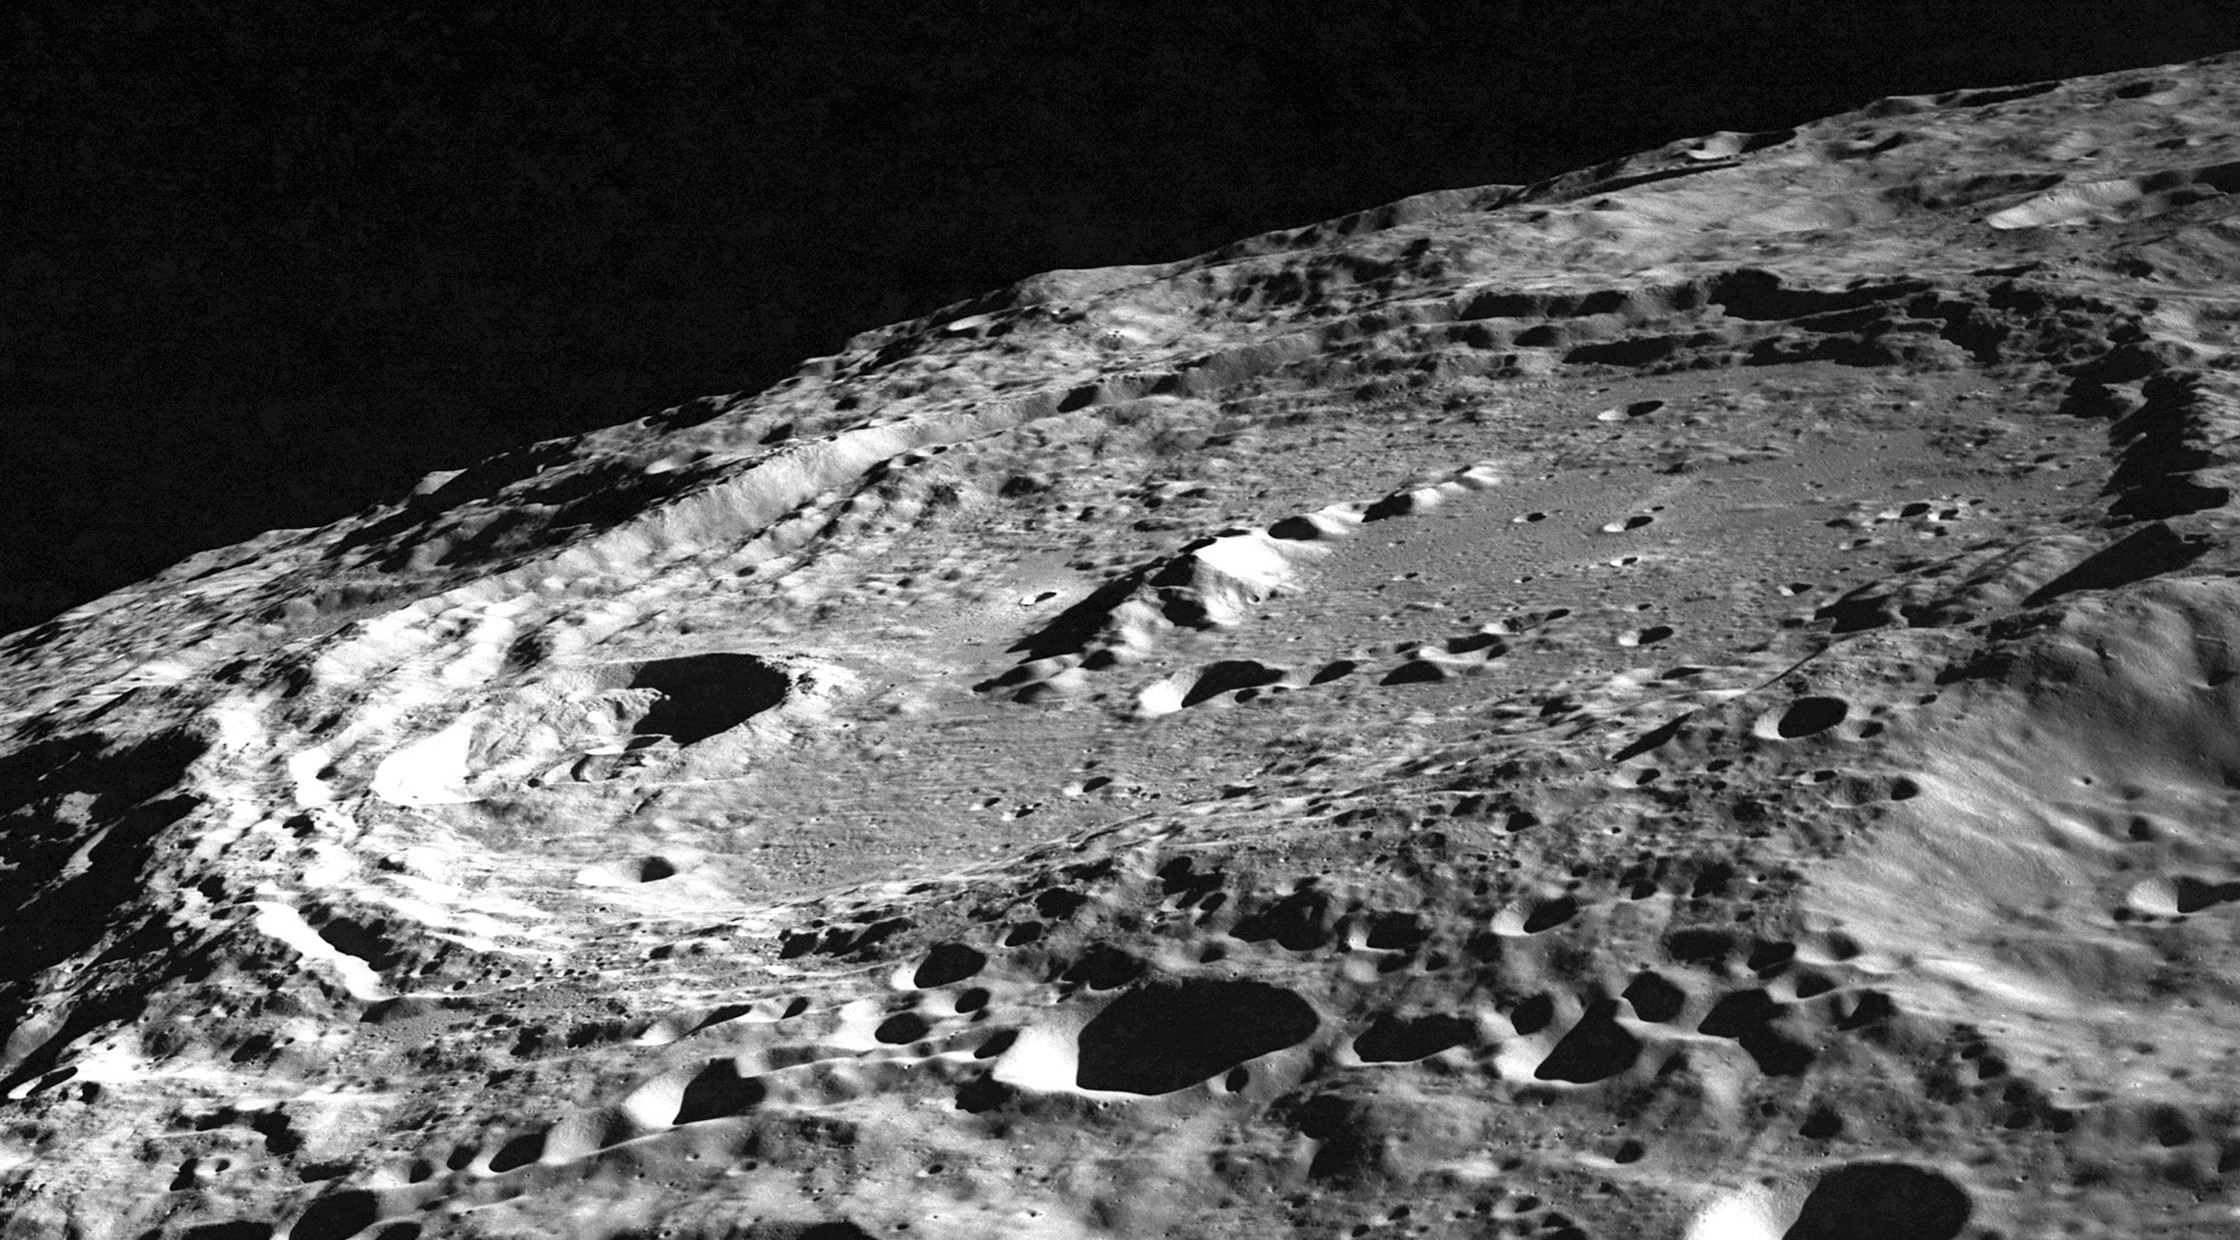 Keeler crater on the Moon. https://commons.wikimedia.org/wiki/File:Keeler_crater_AS10-32-4823.jpg